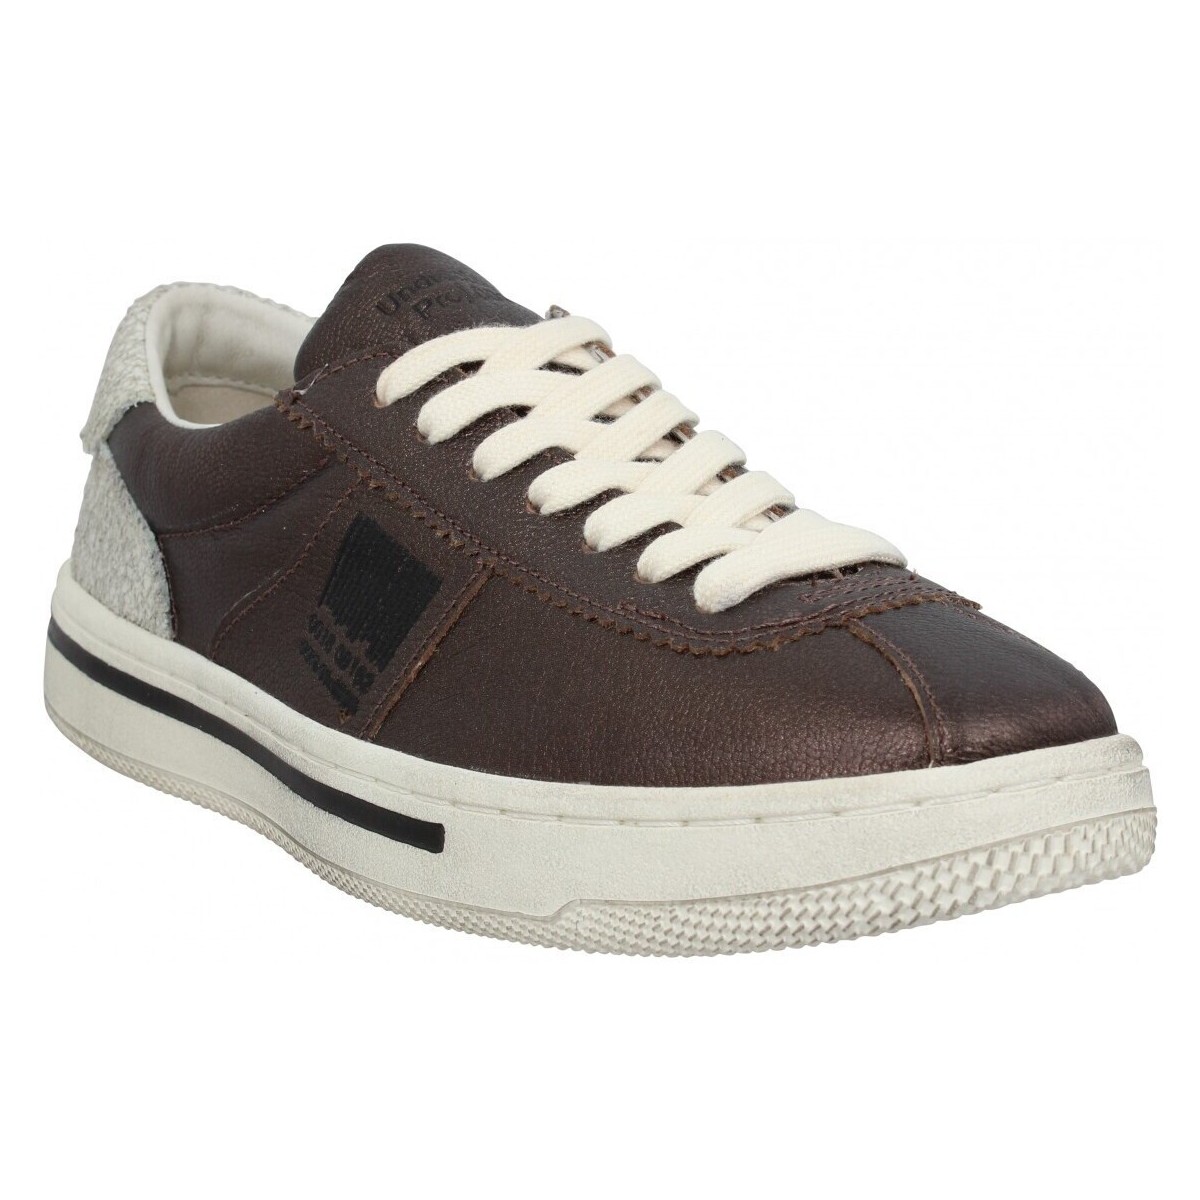 Pro 01 Ject  Sneakers Pro 01 Ject P5lw Cuir Laminated Femme Ebano